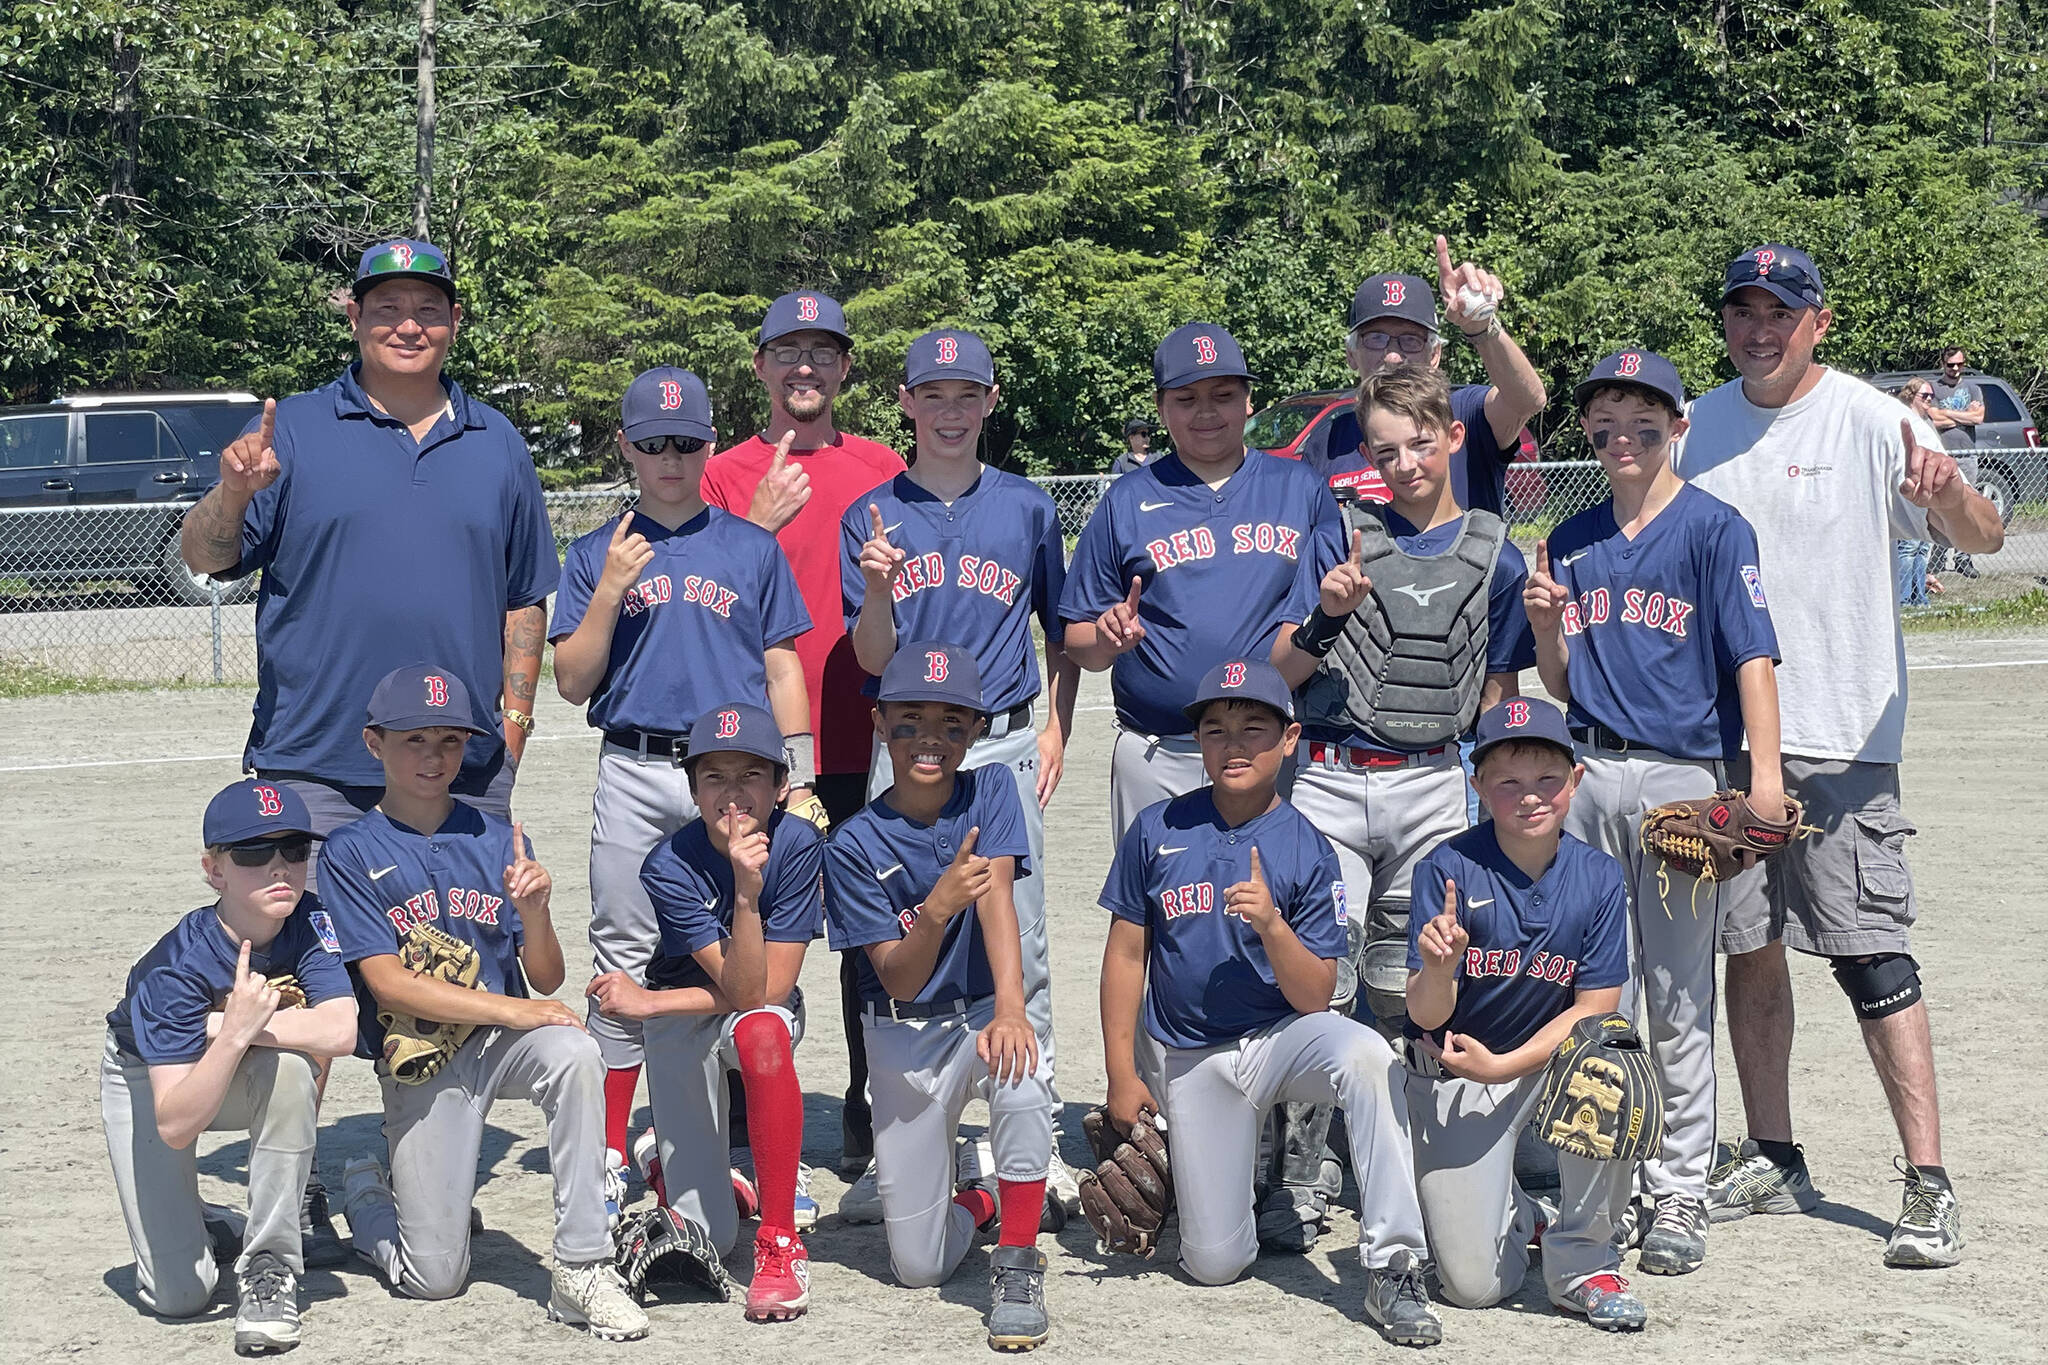 The 2022 Gastineau Little League Majors Division champs are the Juneau Pizza Red Sox. Team members are: (Back row, left to right) manager Nick Nelson, Darwin Decena, coach John Randolf, Andrew Sanders, Joaquin Ramirez, coach PJ, Jamison Randolf, Brenner Harralston, coach Tom Pegues, (front row, left to right) Liam keisseling, Jack Pegues, Micah Nelson, Myles Pasion, Marquis Lim, Matthew Shockly and Fischer Kolodziejski (not pictured.) (Courtesy Photo / Nick Nelson)